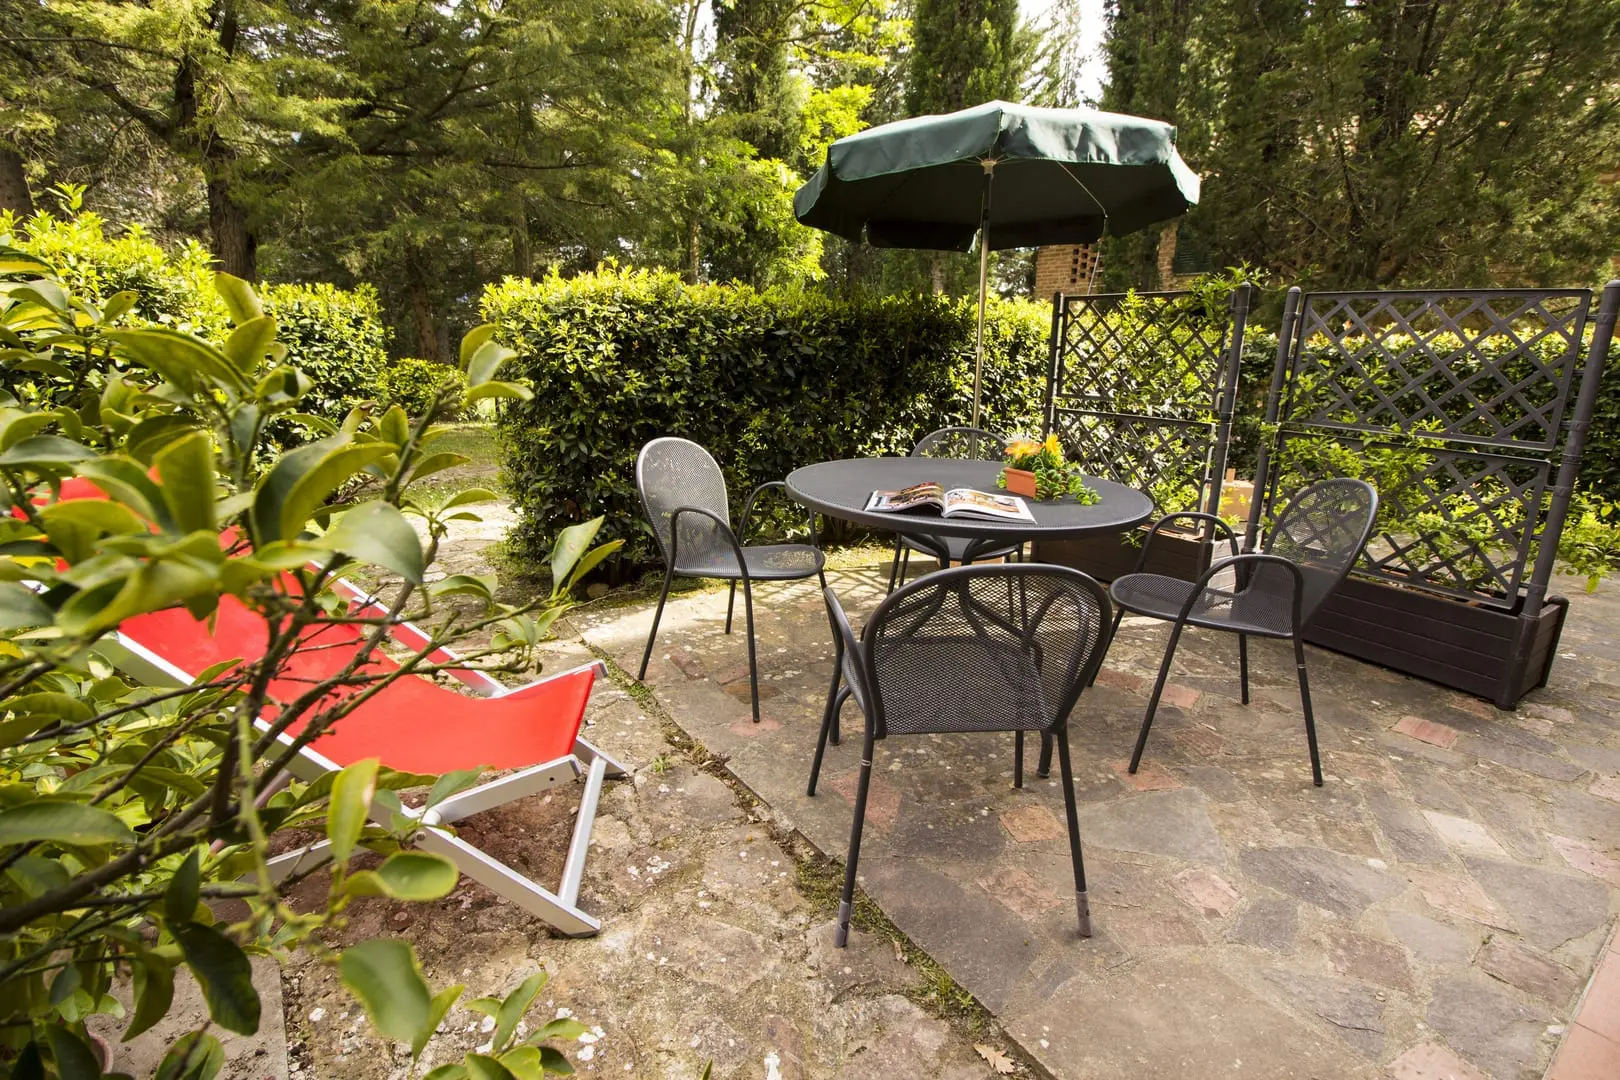 A patio set with an umbrella and chairs.